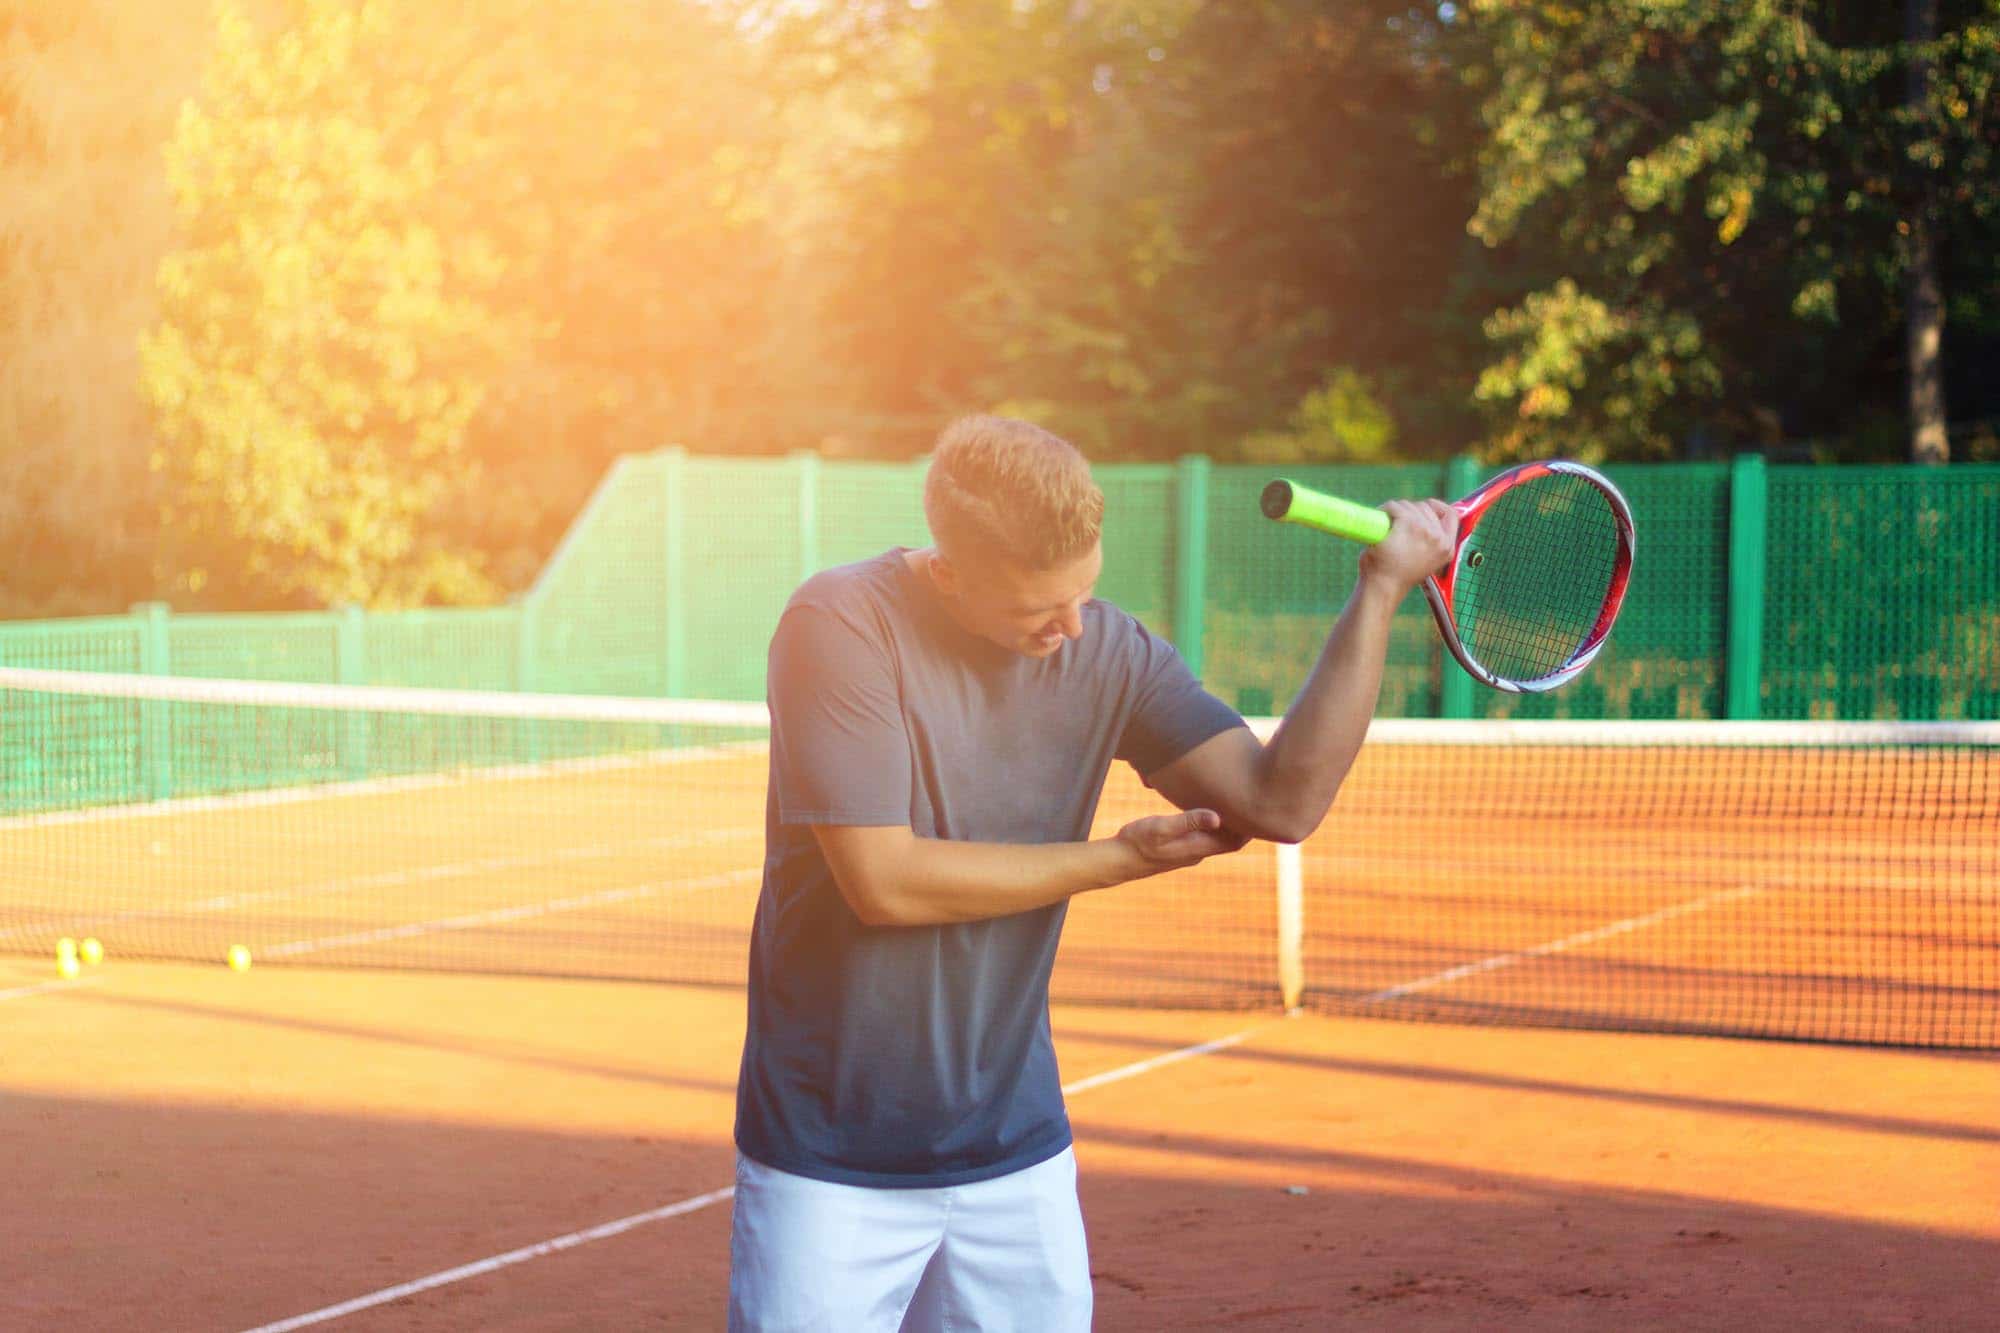 Man playing tennis with discomfort in his elbow